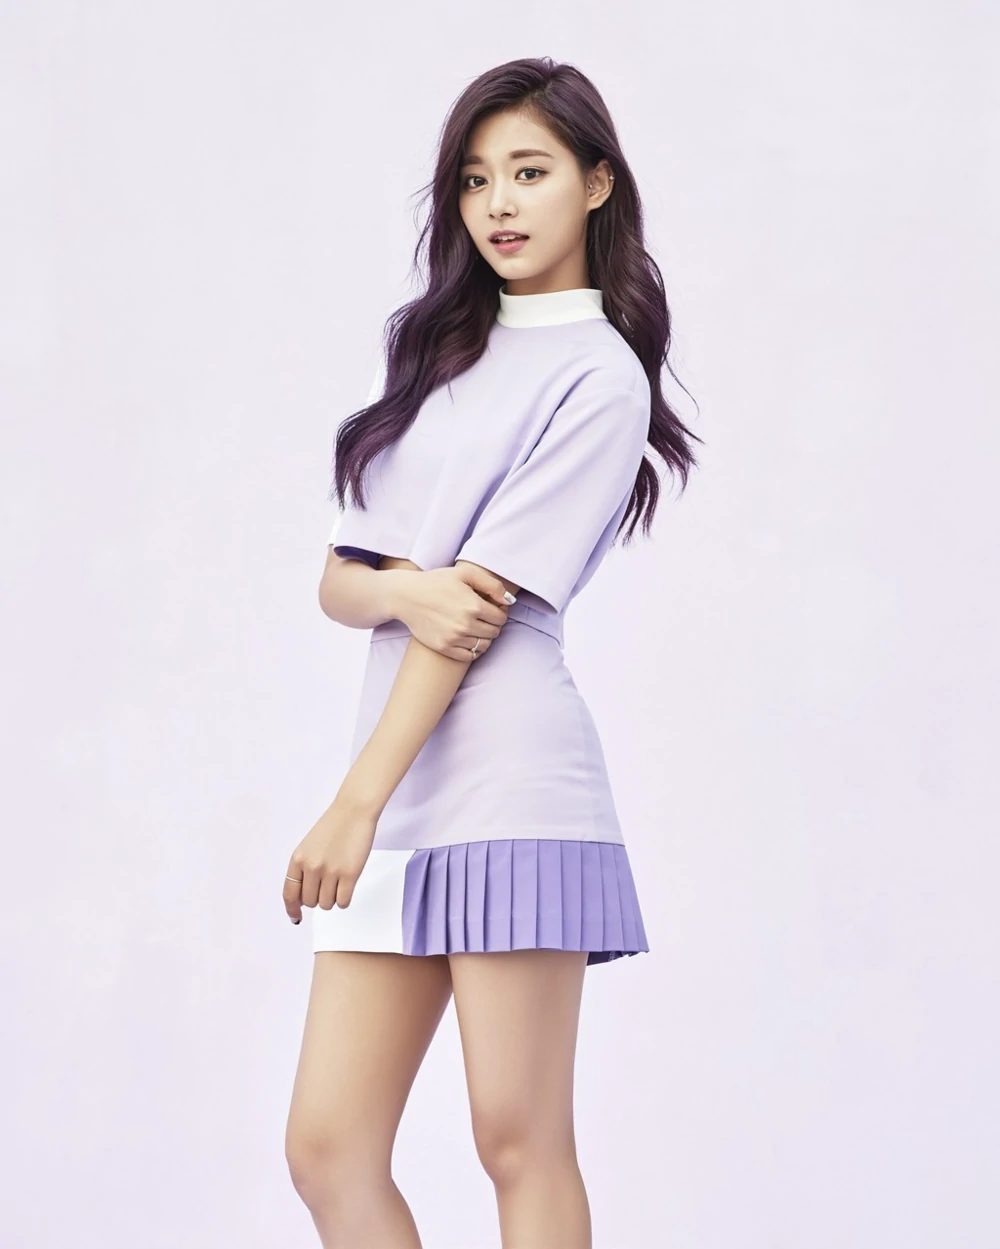 Twice Twicecoaster: Lane 1 Tzuyu Concept Teaser Picture Image Photo Kpop K-Concept